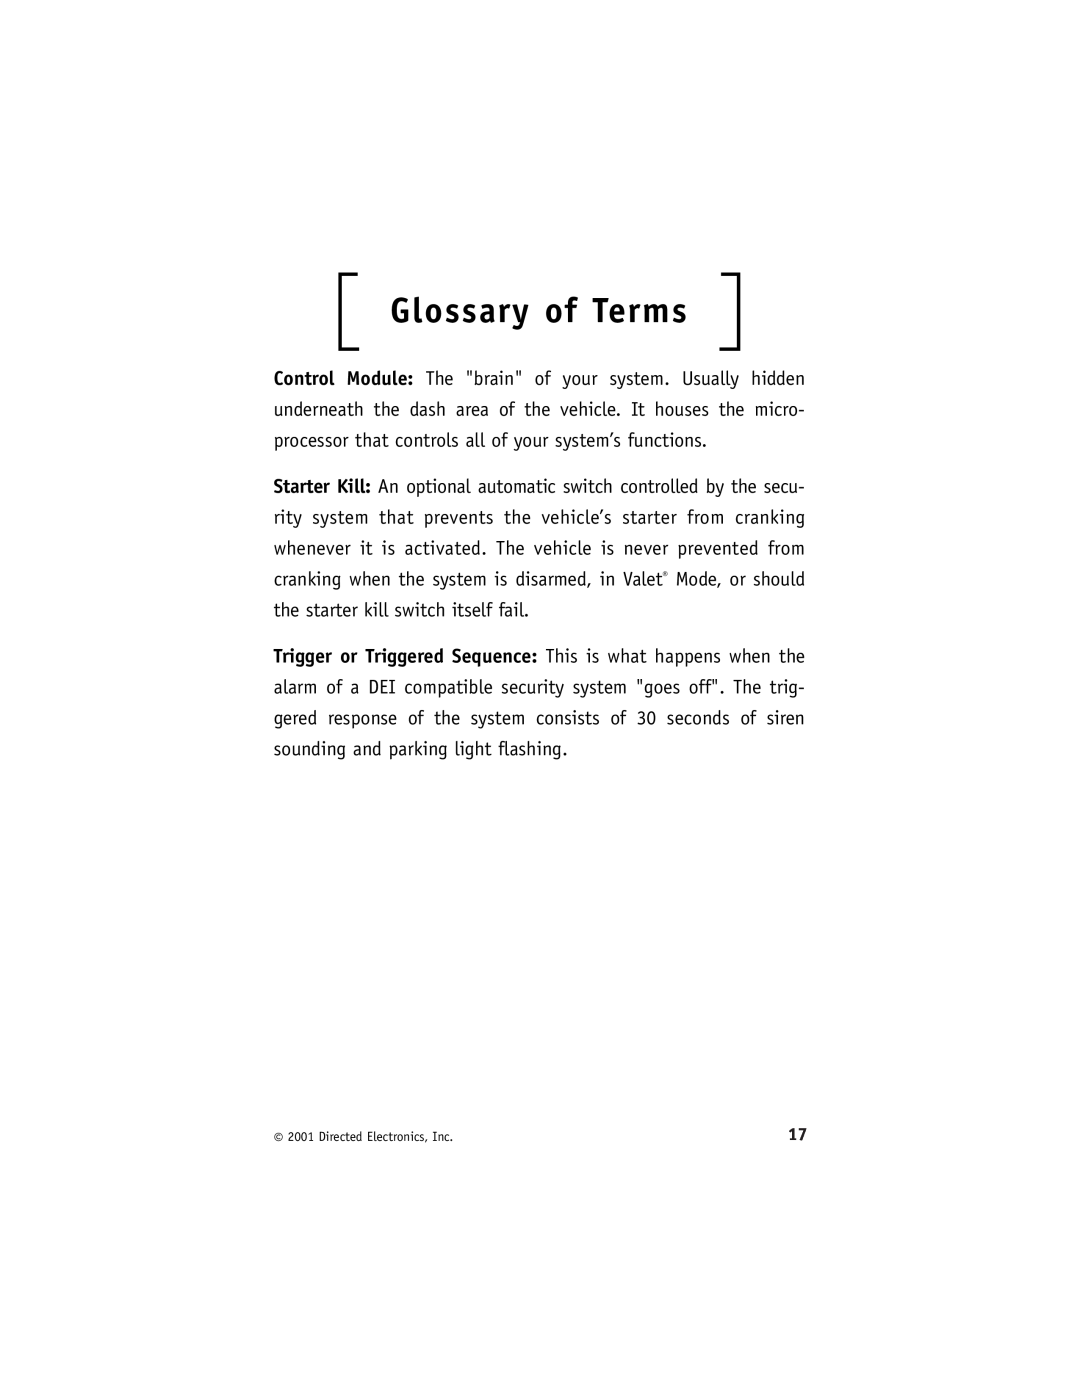 Directed Electronics Model 400 manual Glossary of Terms 